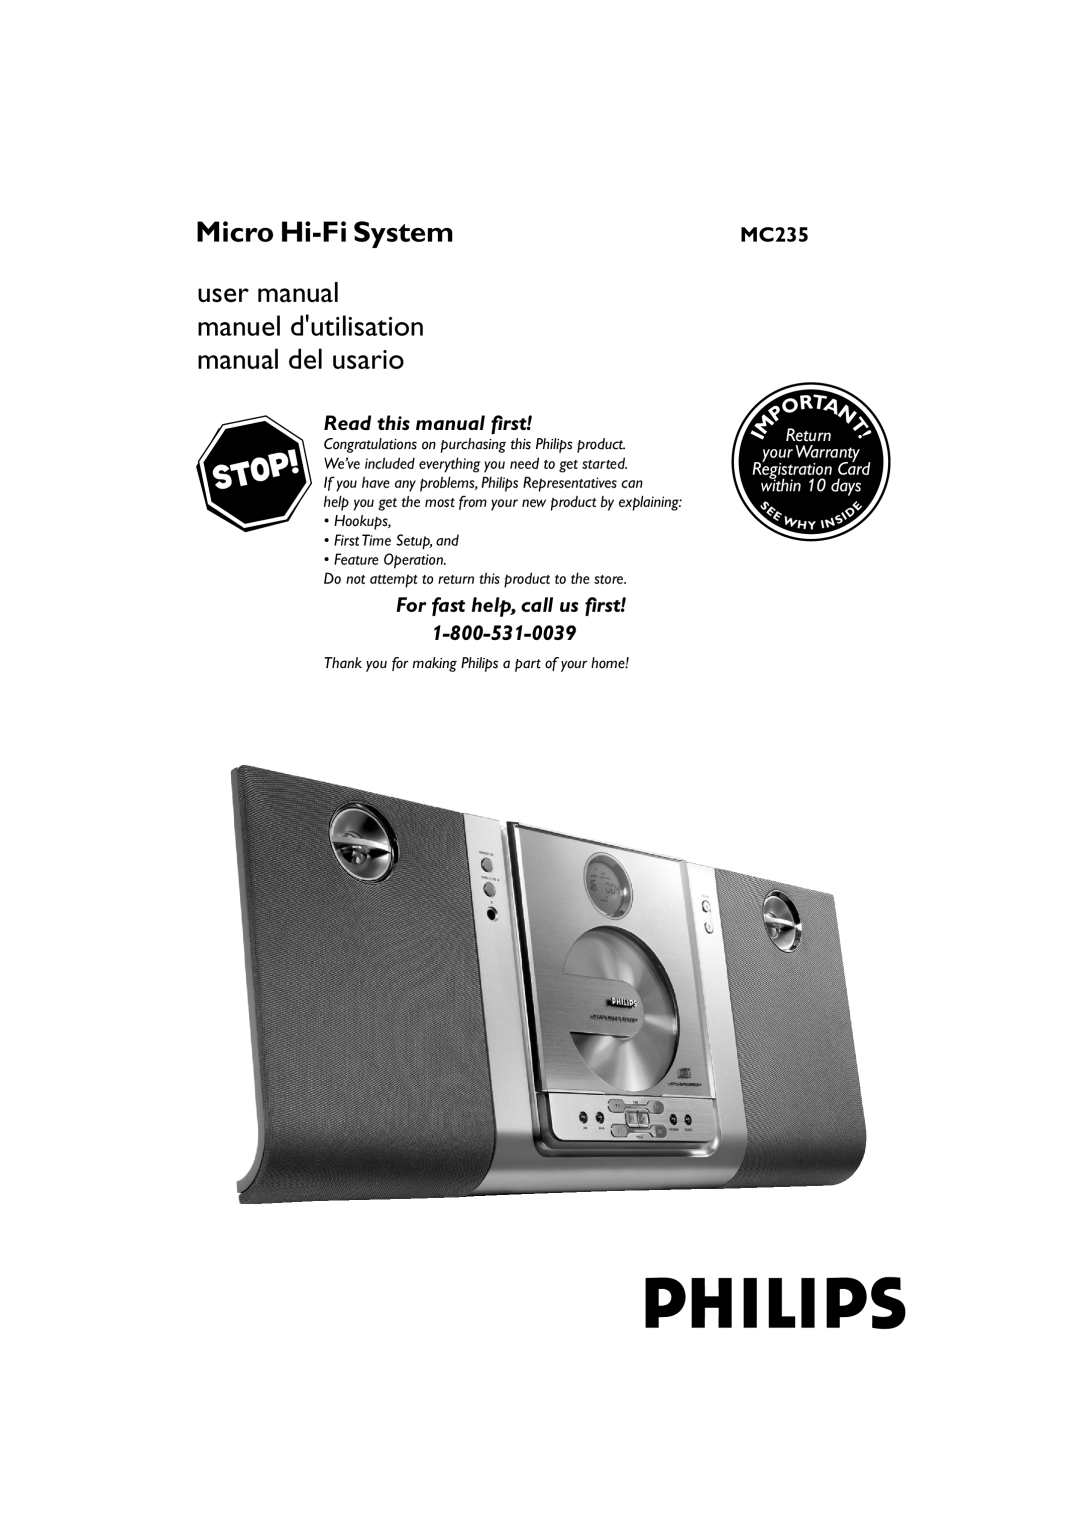 Philips MC235/37B user manual Micro Hi-FiSystem, your Warranty Registration Card within 10 days 